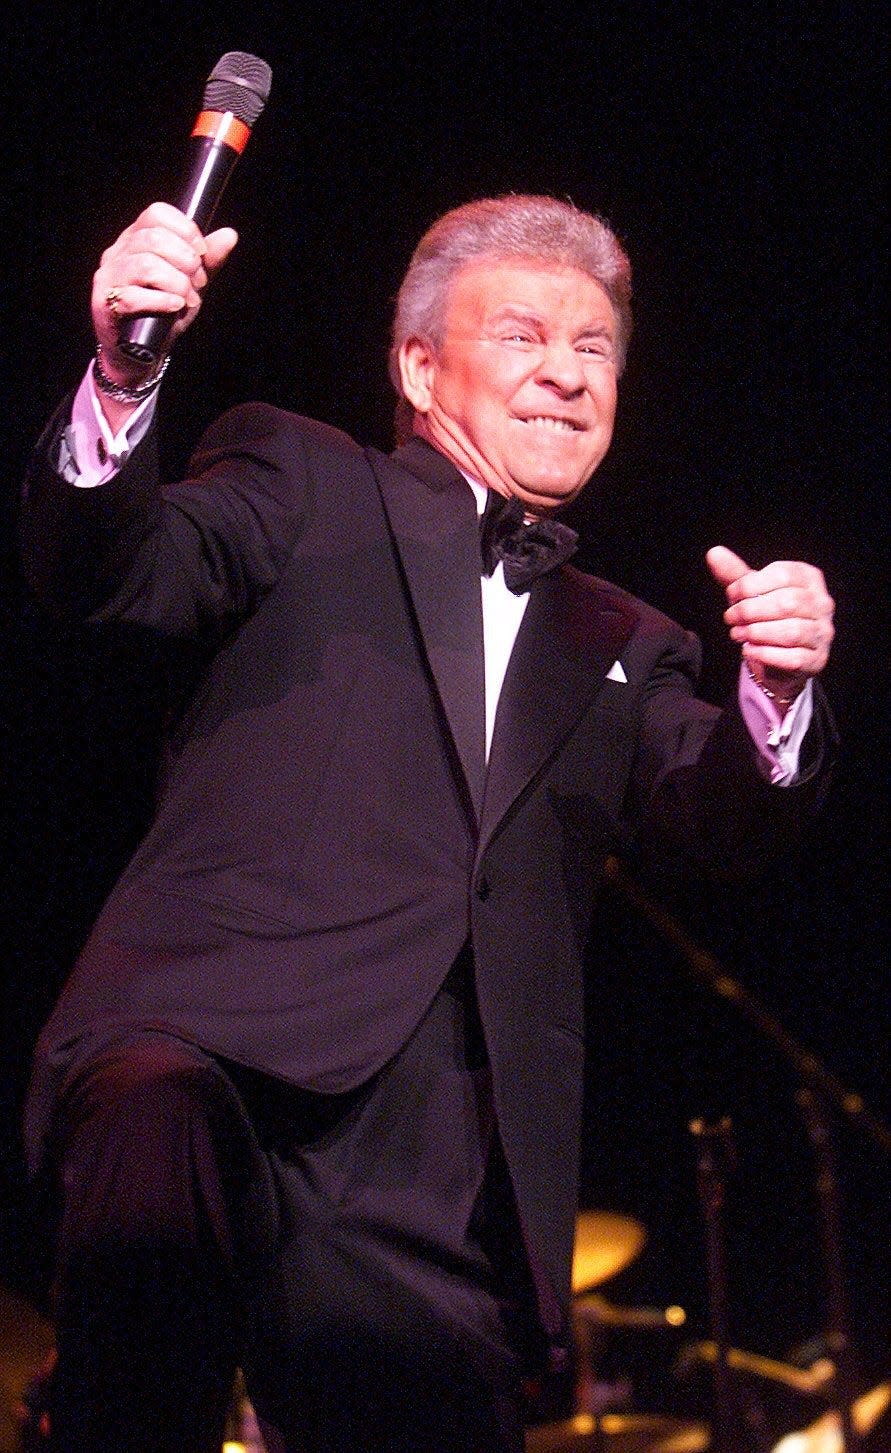 Singing icon Bobby Rydell performs at an Atlantic City casino in his later years